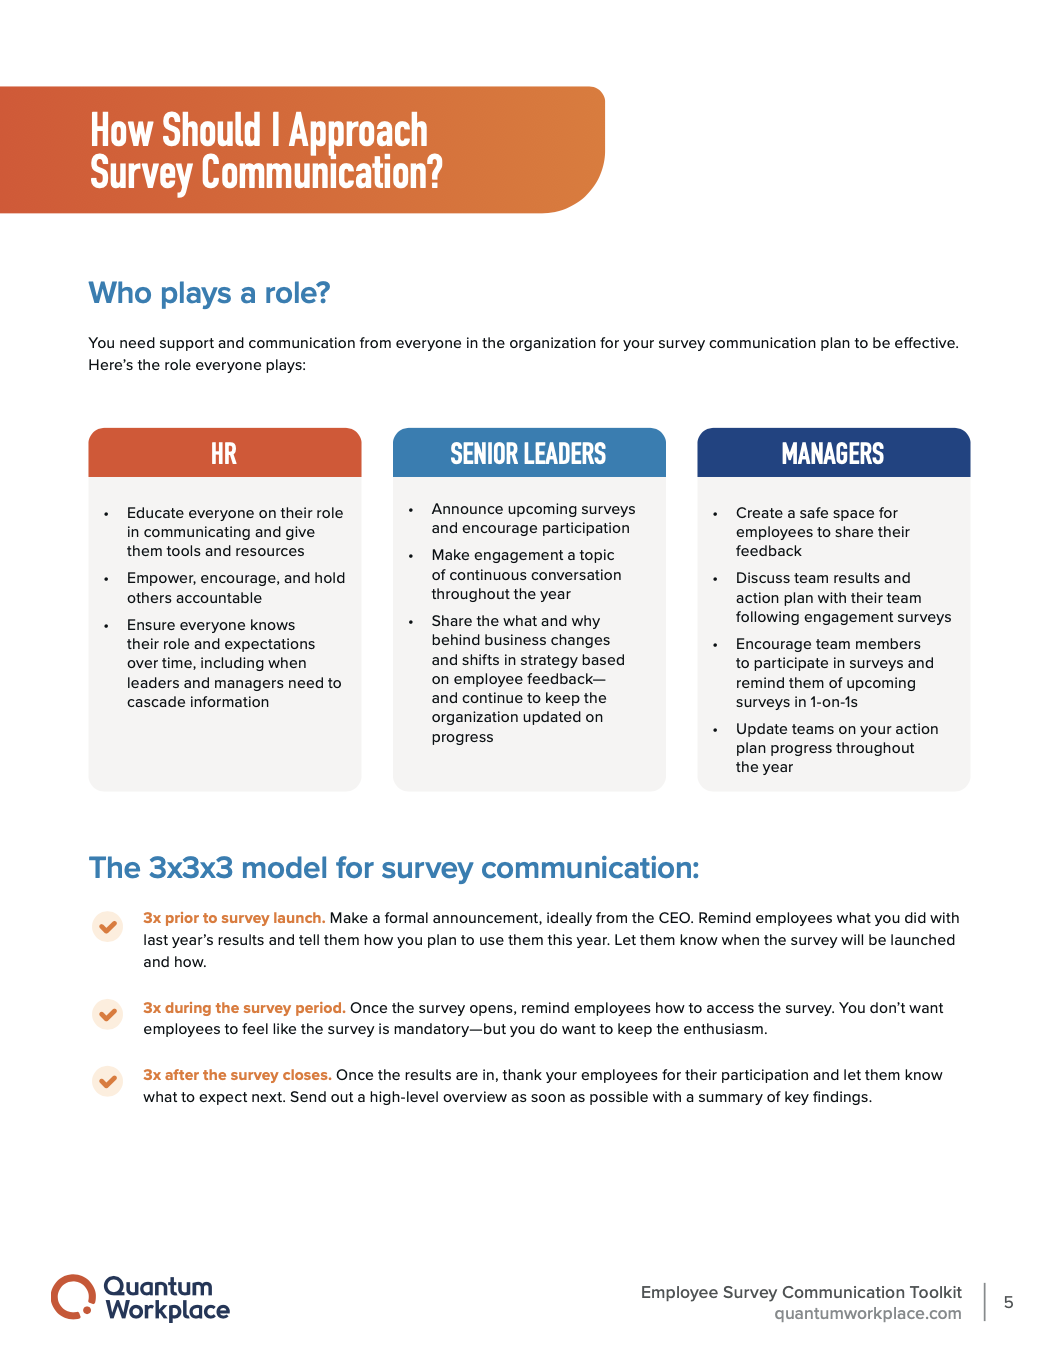 eBook preview: How to approach survey communication